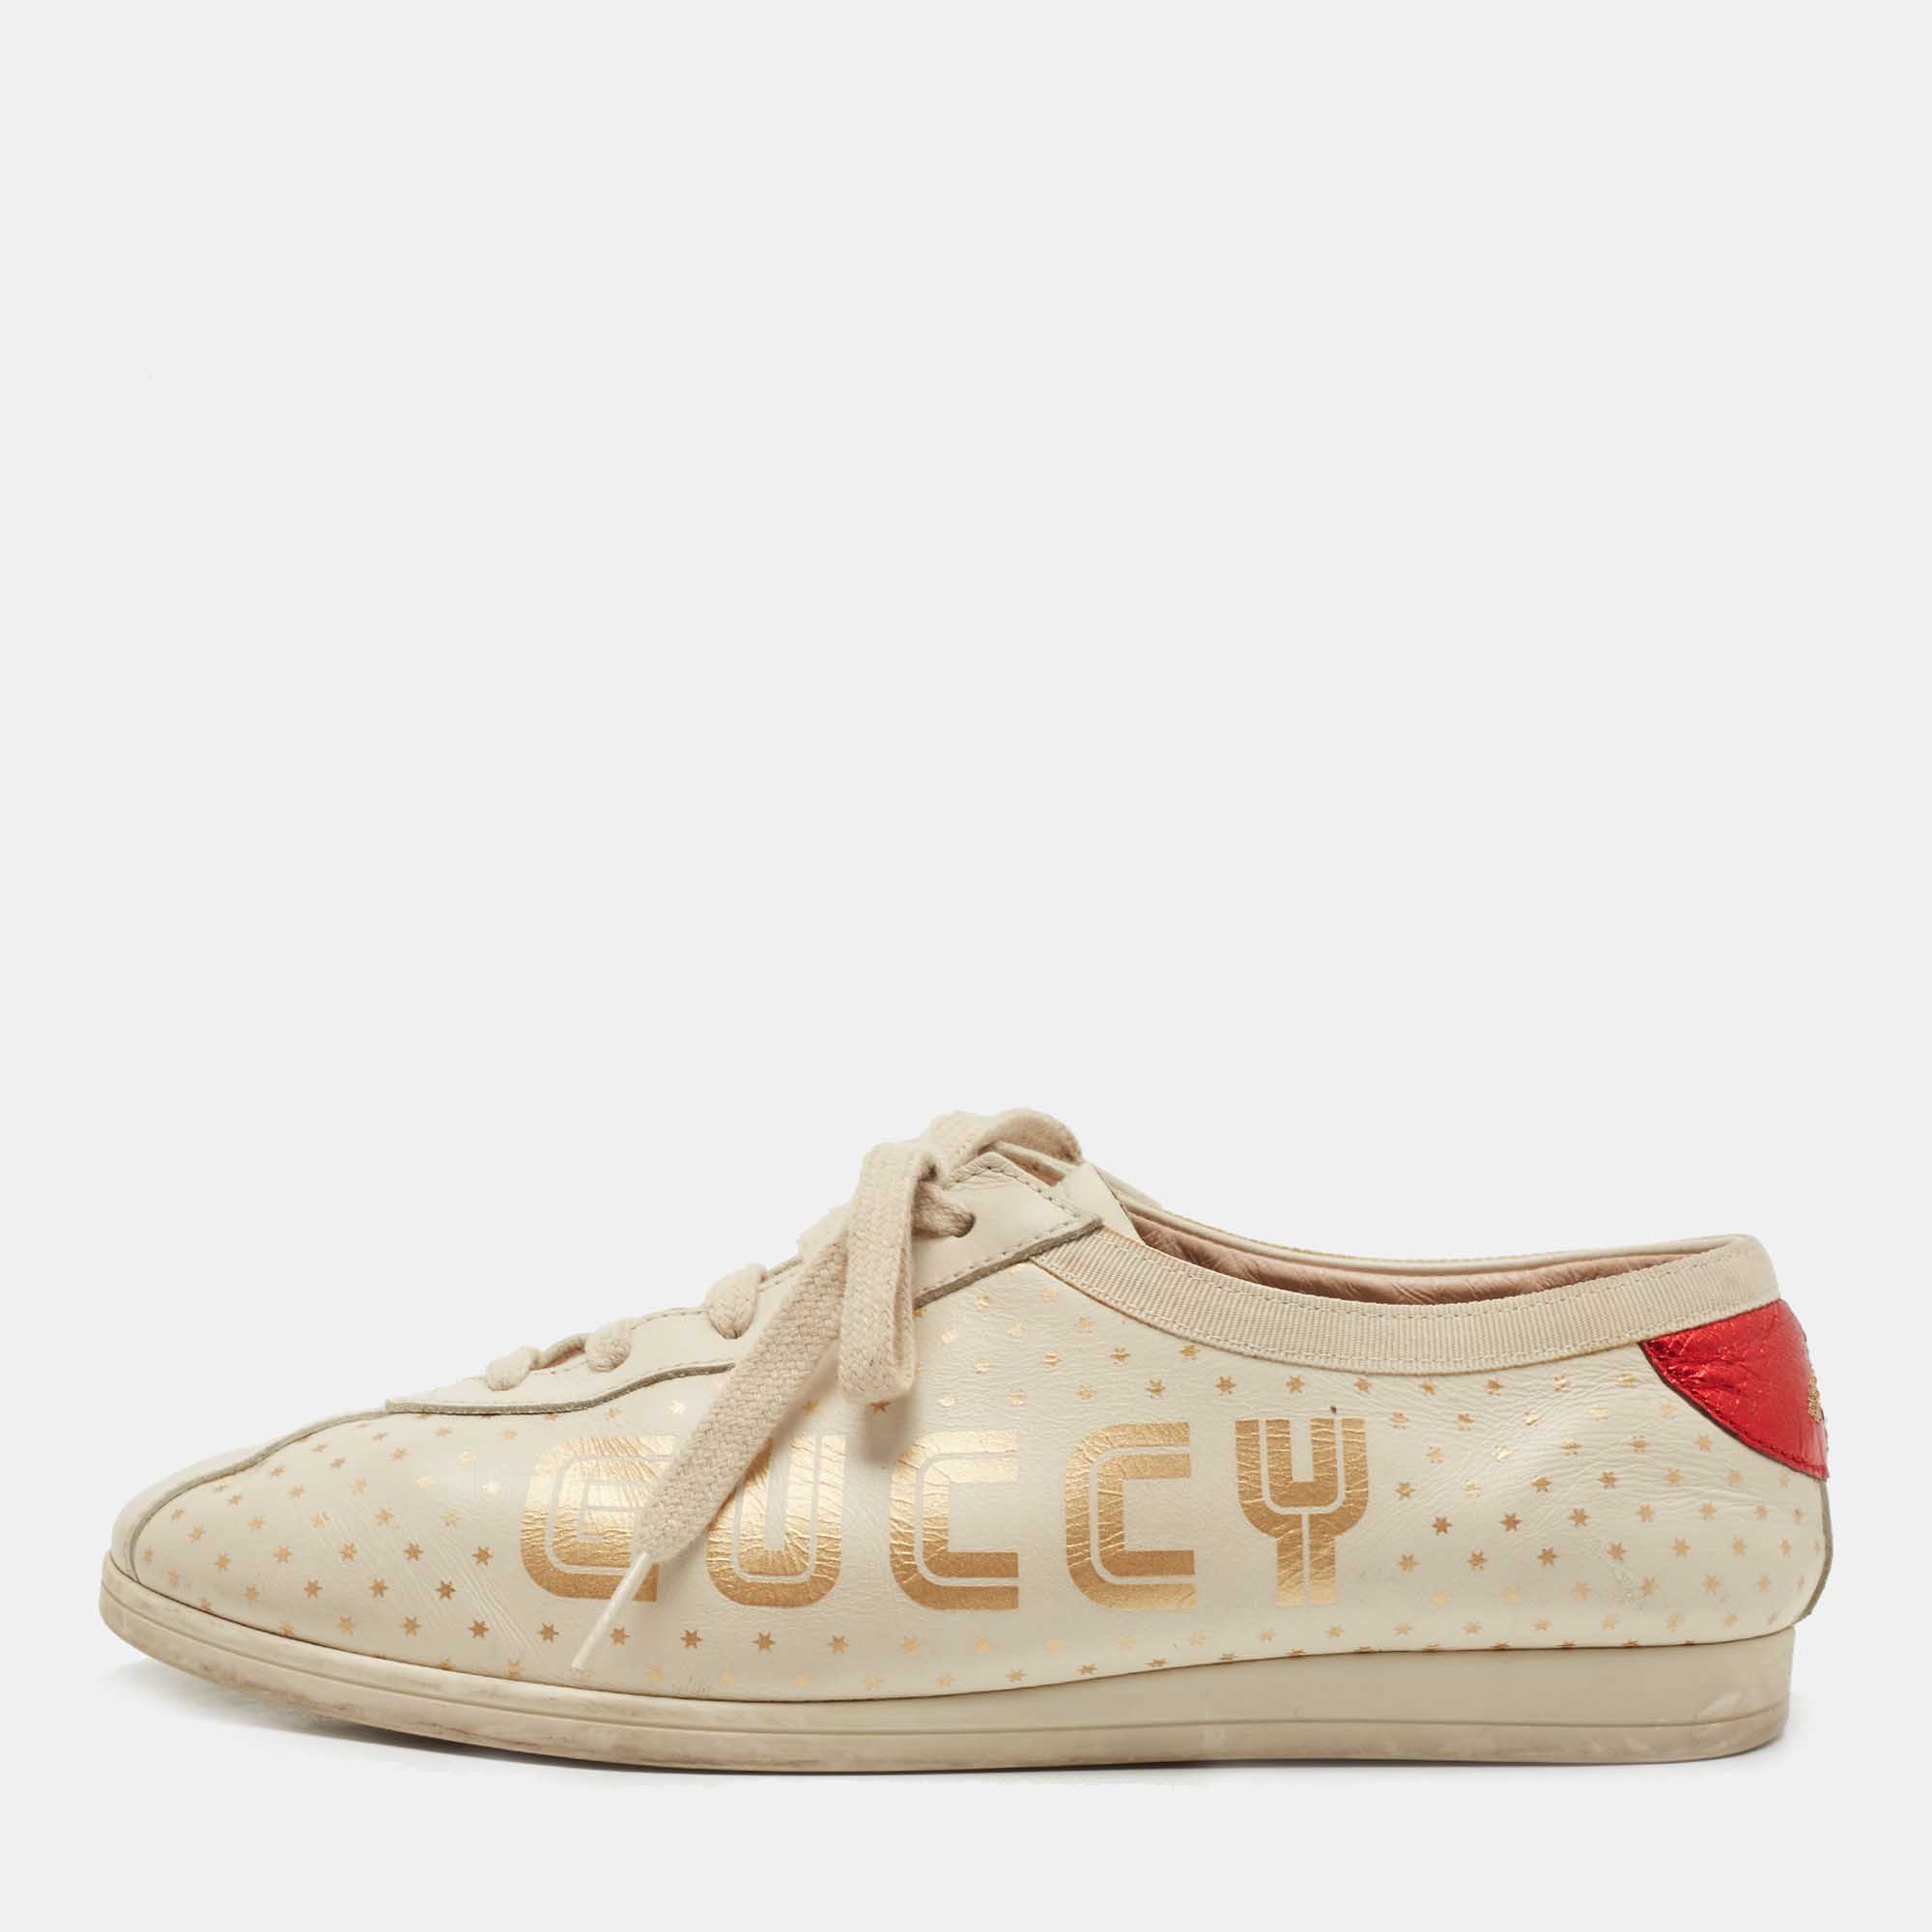 Gucci beige leather falacer guccy sneakers size 37